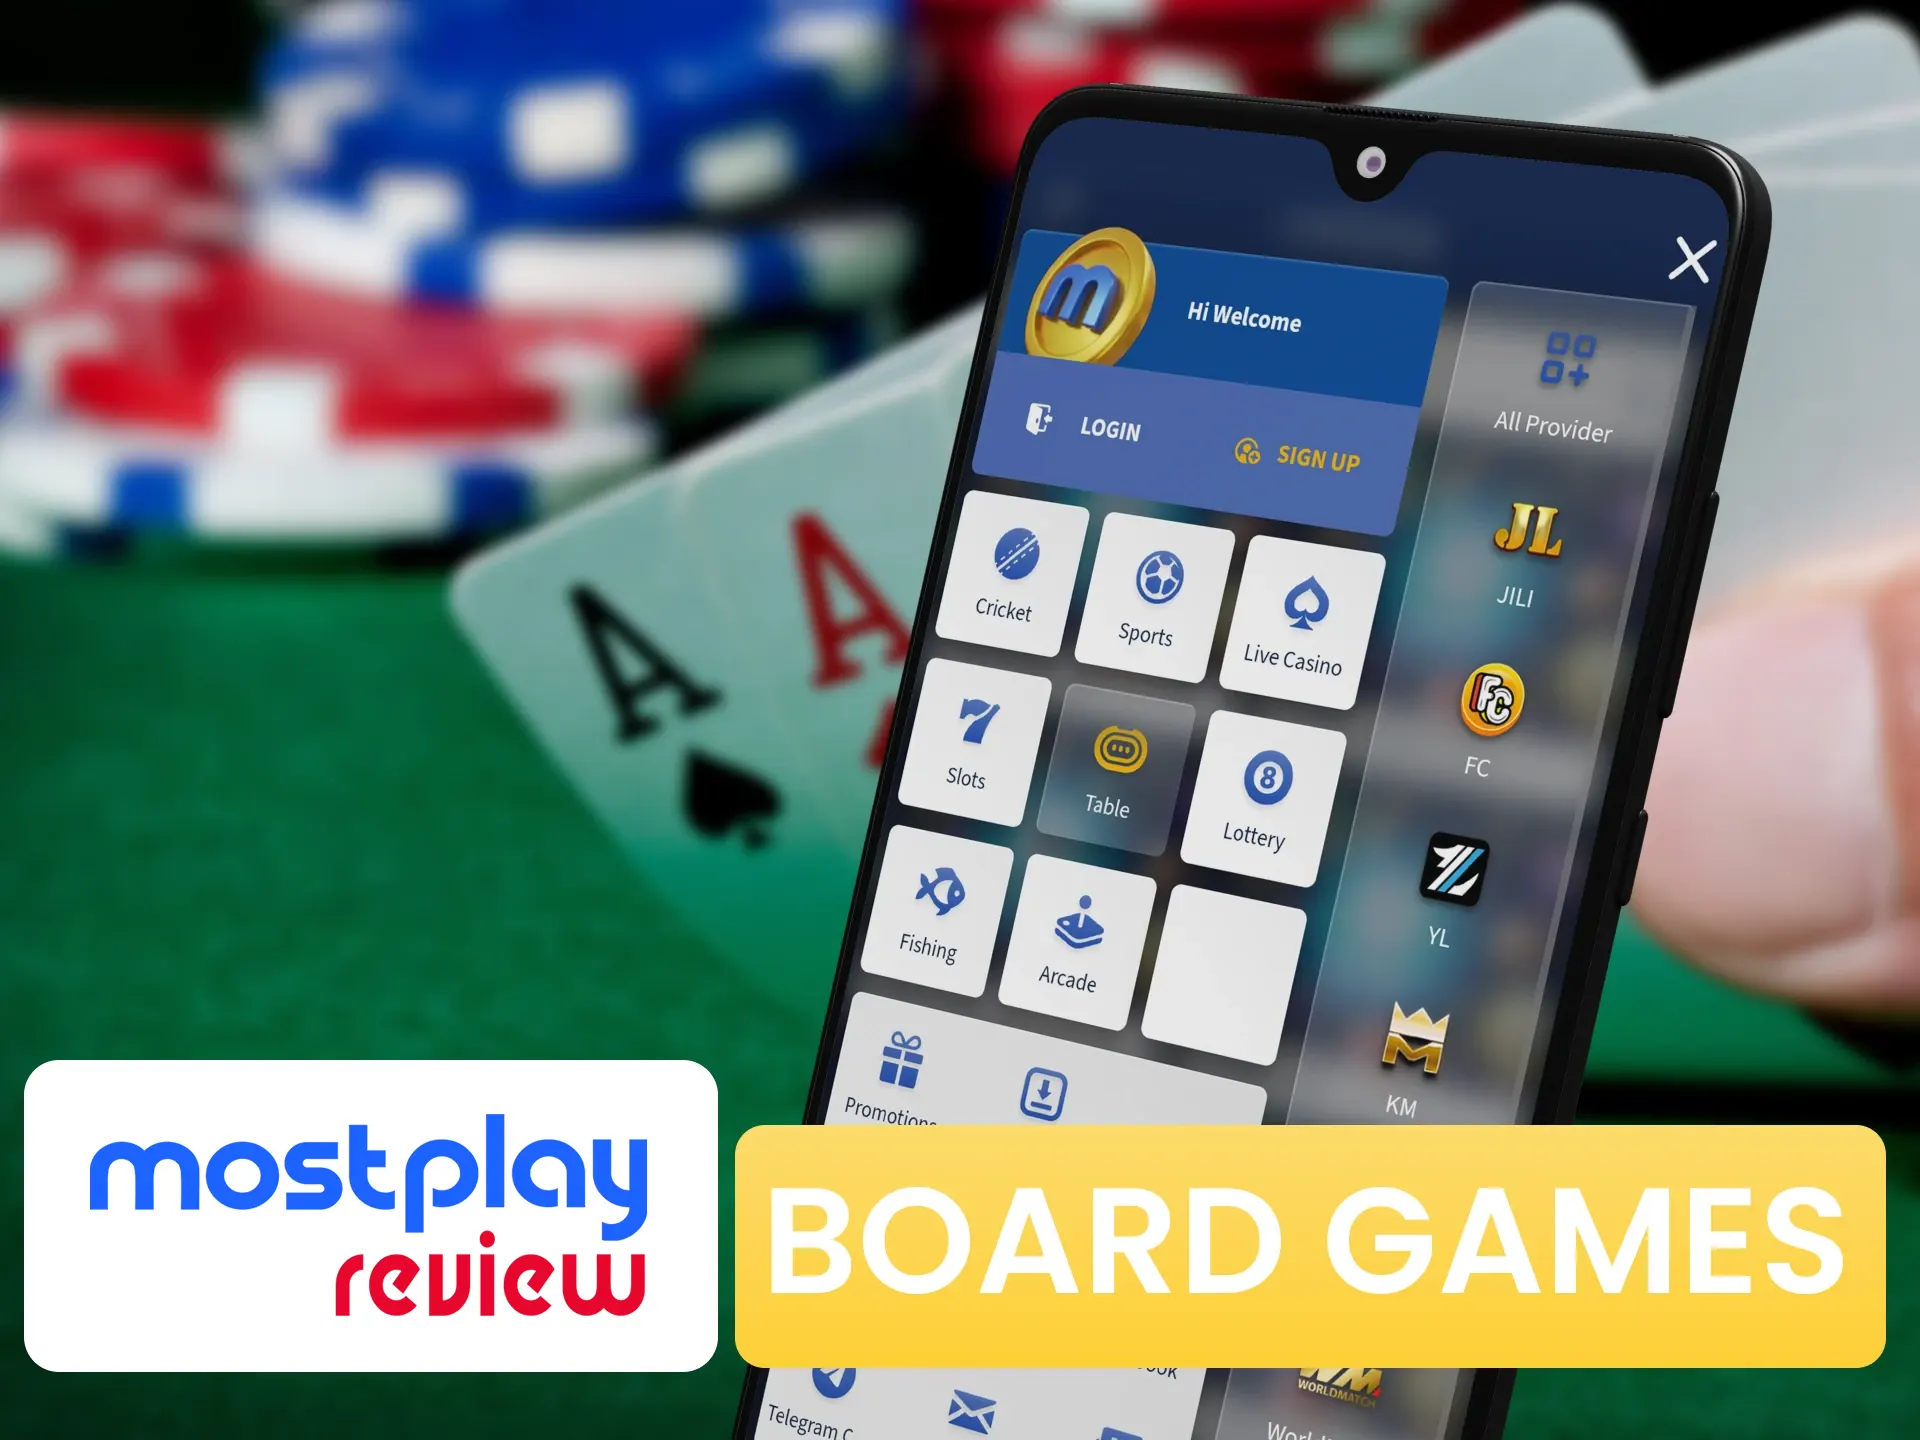 Play board games at Mostplay casino with real people.